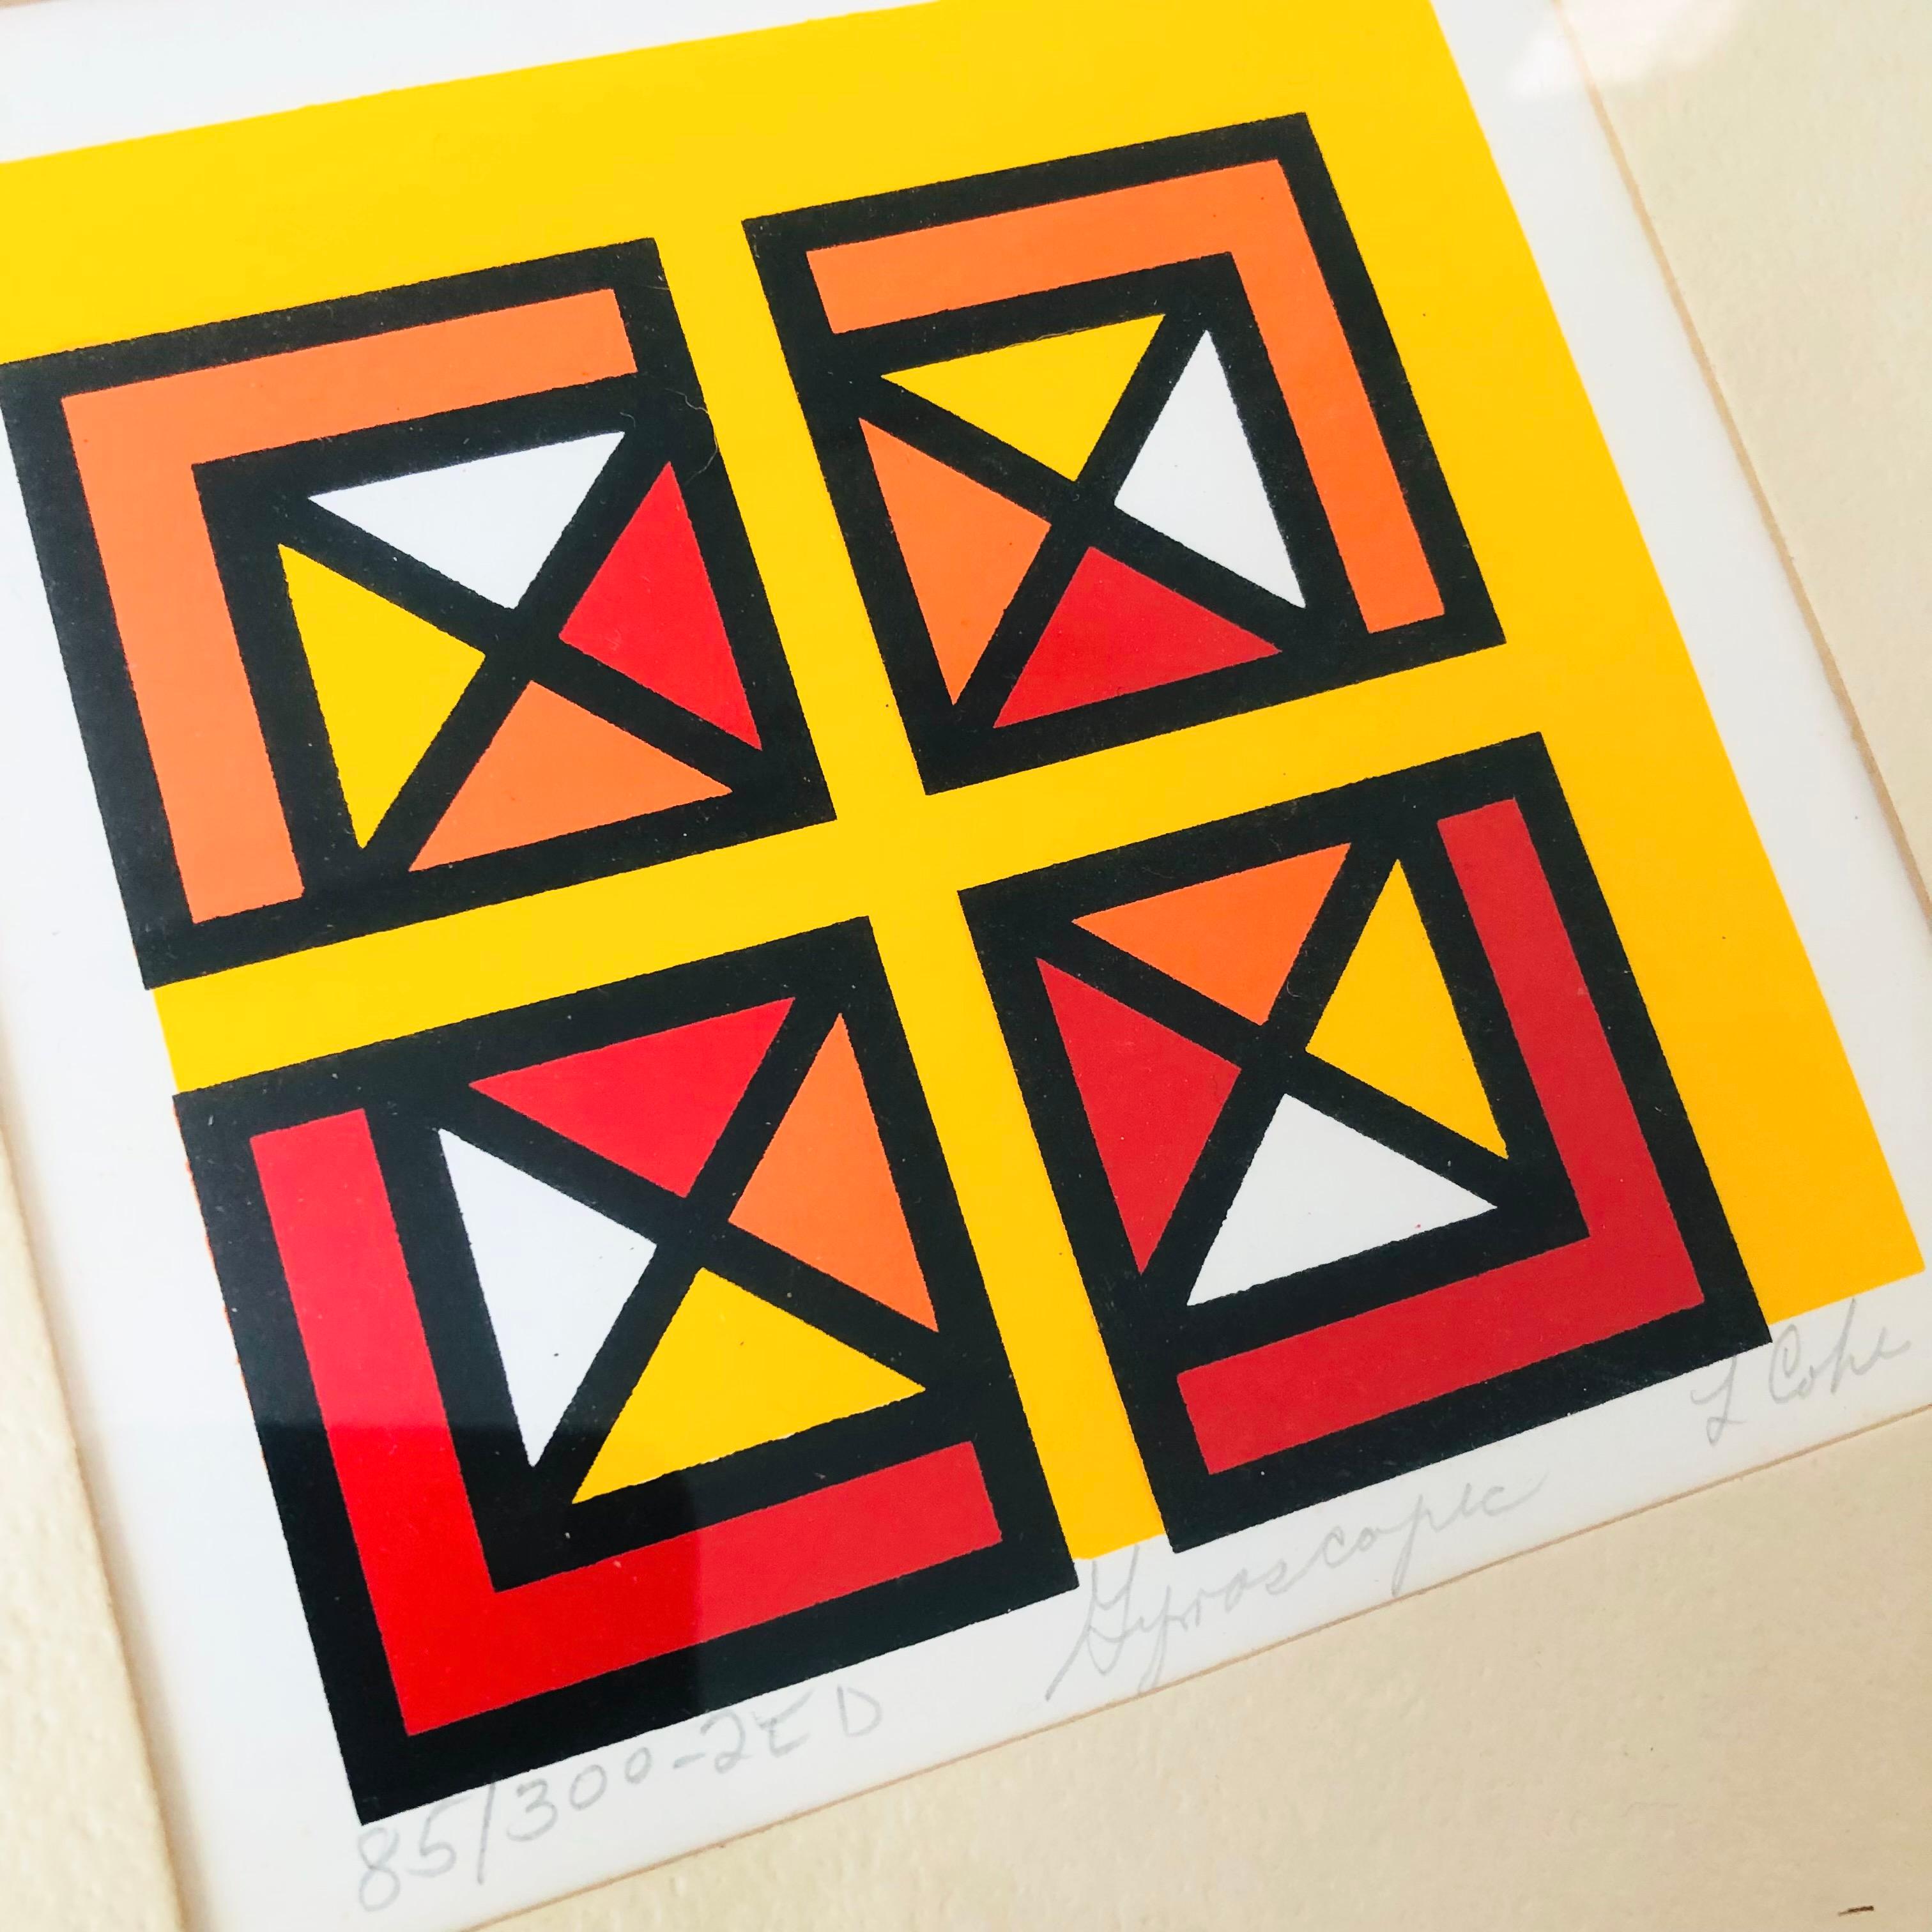 American 1970s Geometric Abstract Serigraph by L Cohe Titled 